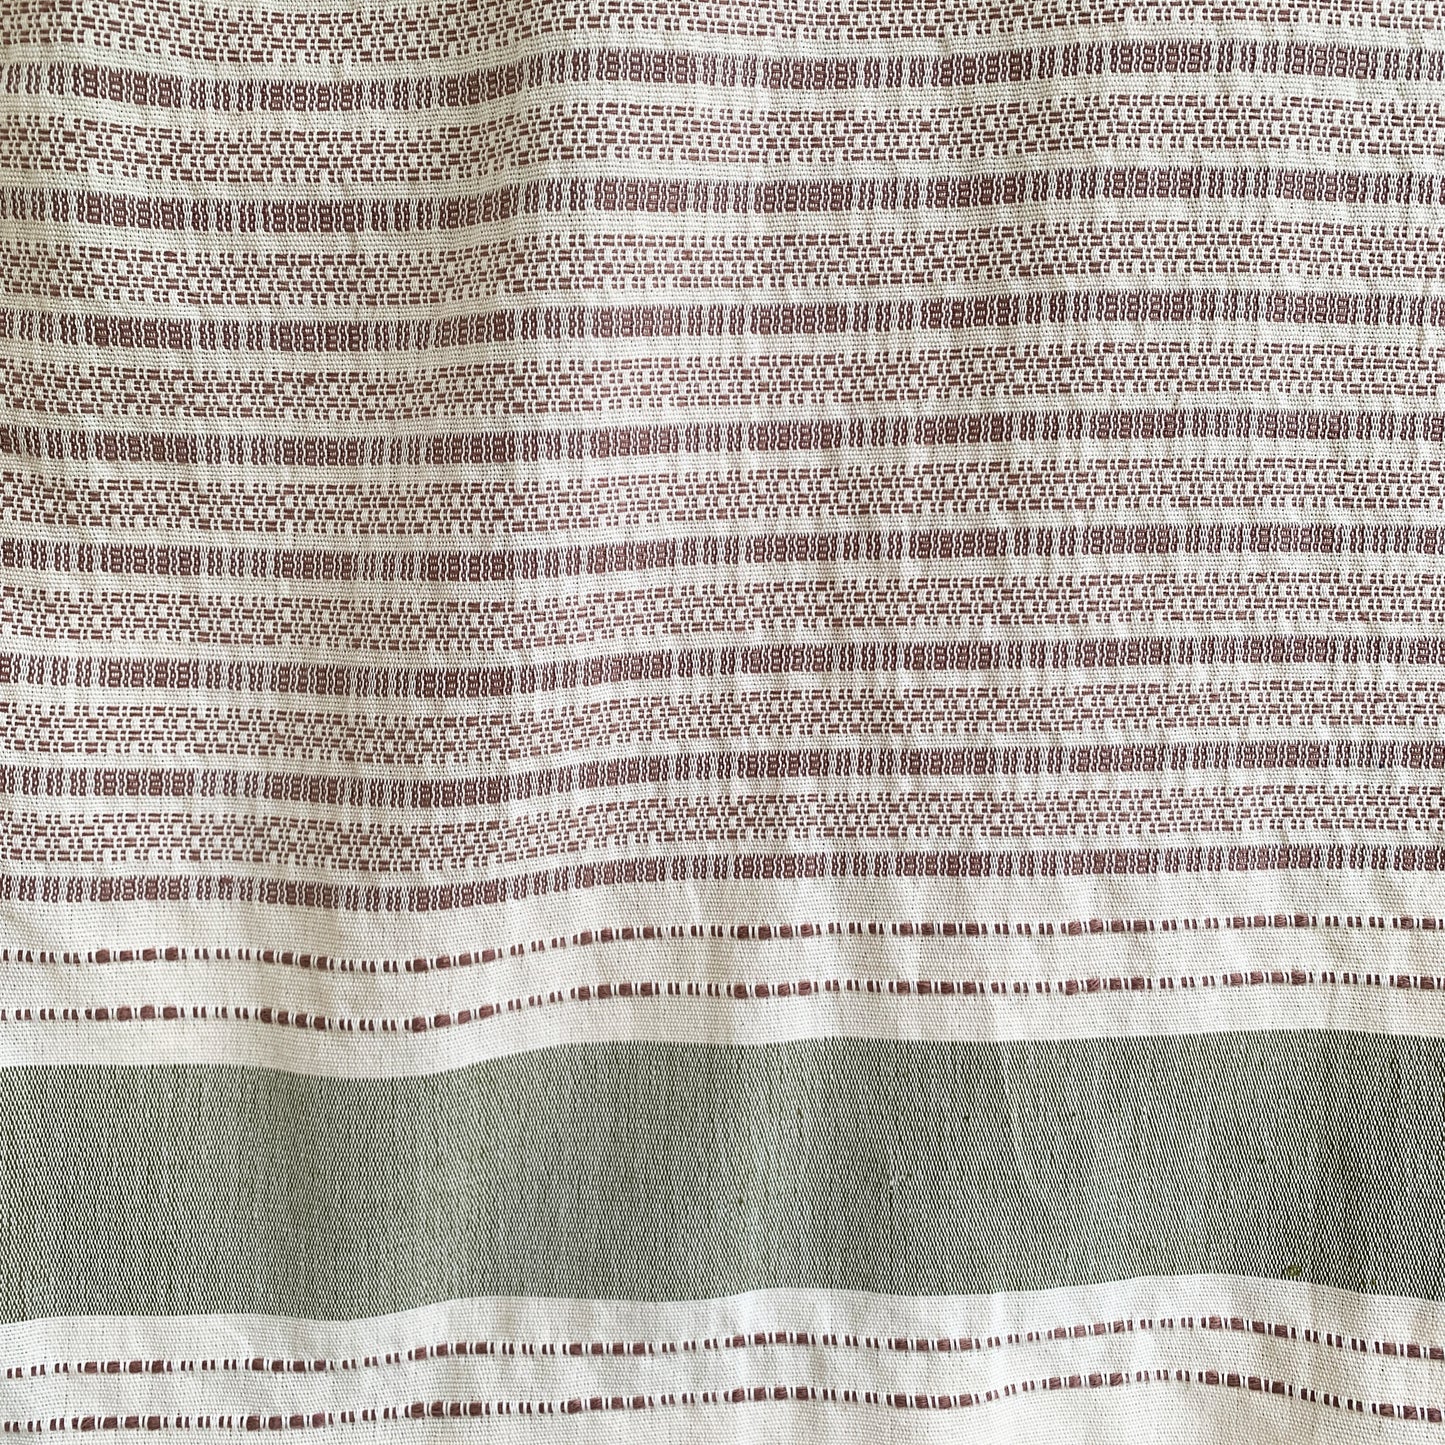 Handwoven Glitch Light weight Throws Olive